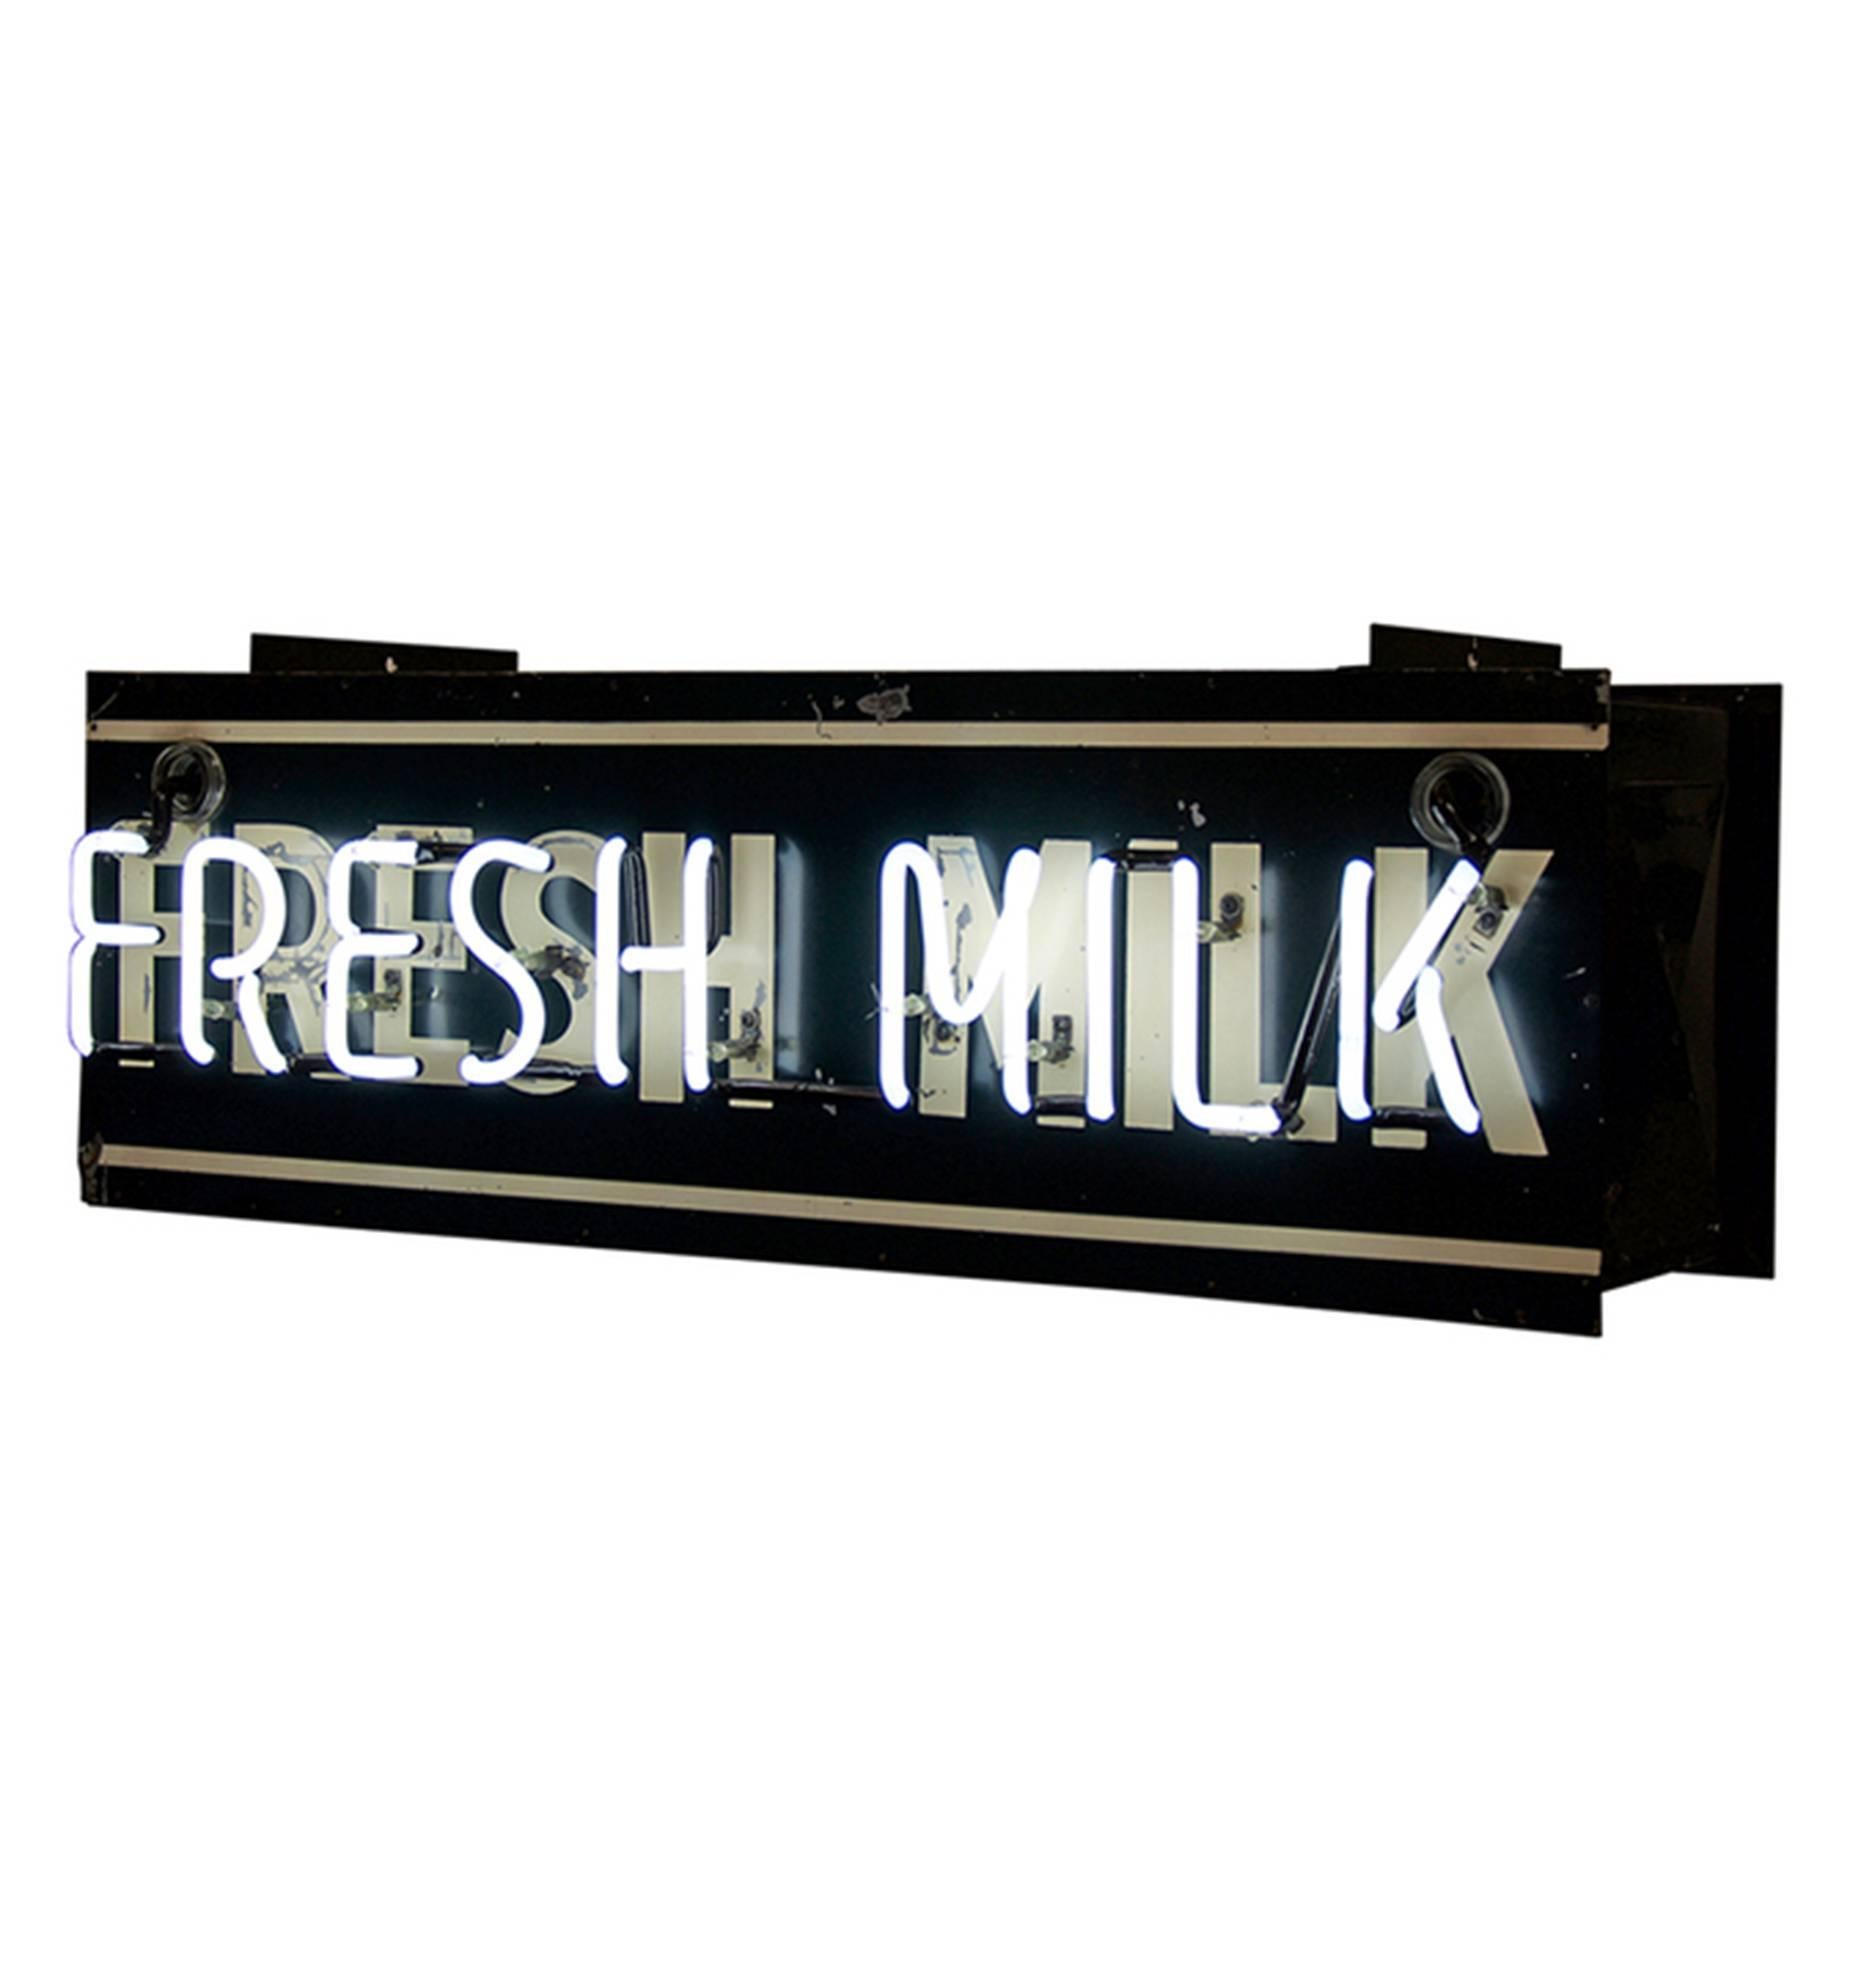 Straight from a Mid-Century general store or food mart comes this incredible double-sided Fresh milk neon sign. We love the well-preserved green and white finish of the sign canister, worn away here and there to show the metal below. The steel